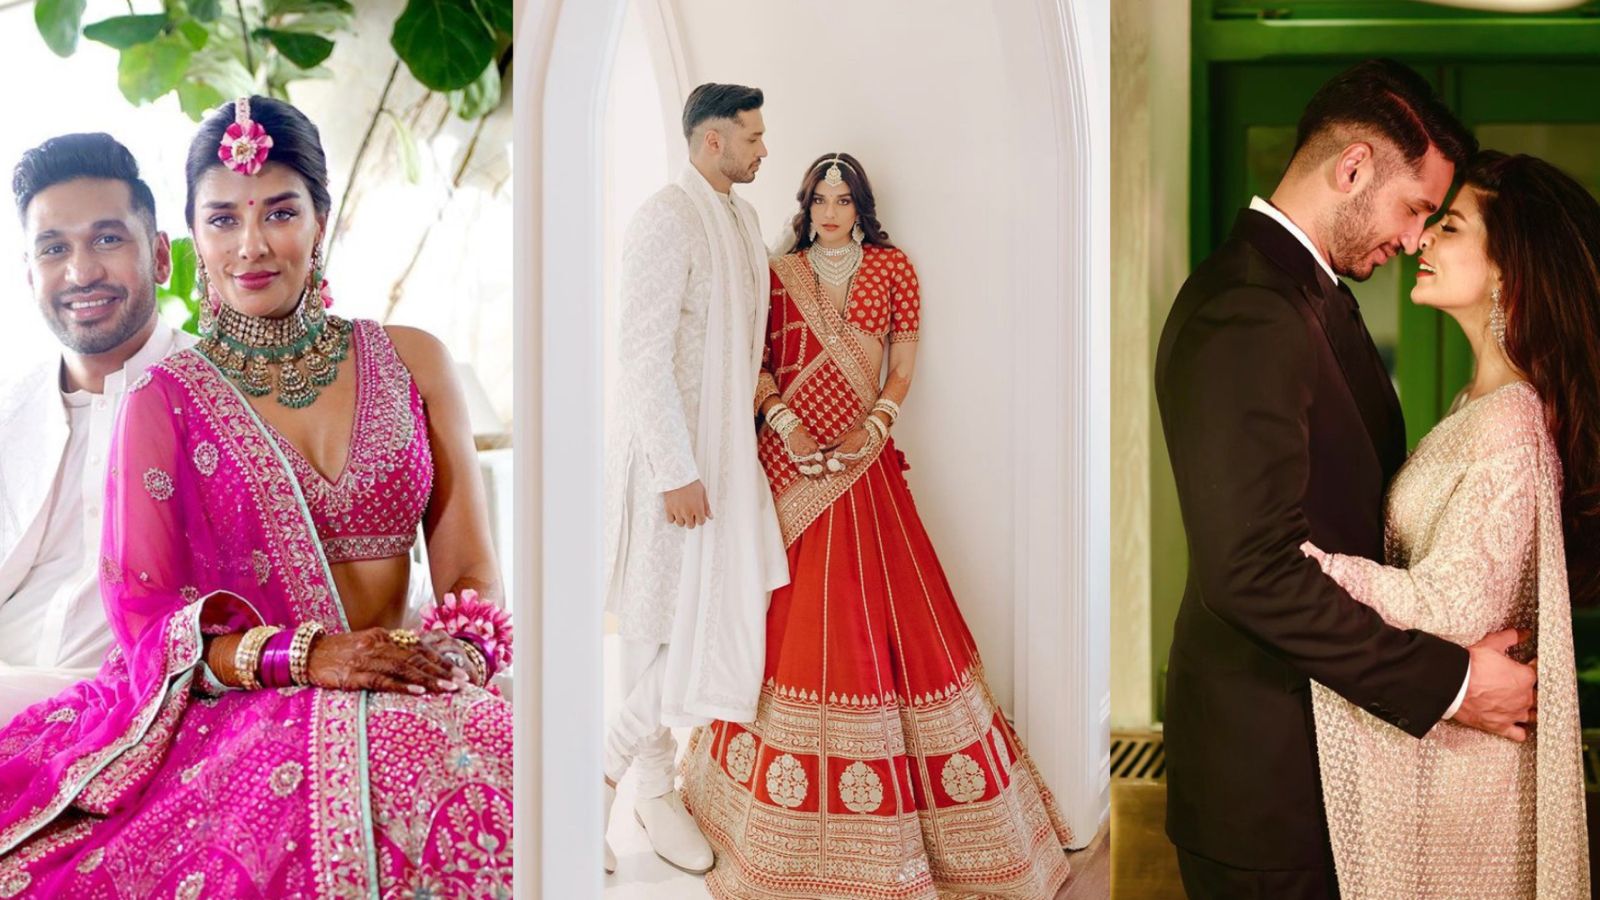 The Dreamy Wedding Of Arjun Kanungo And Carla Dennis - Stealing Our Hearts Ever Since!